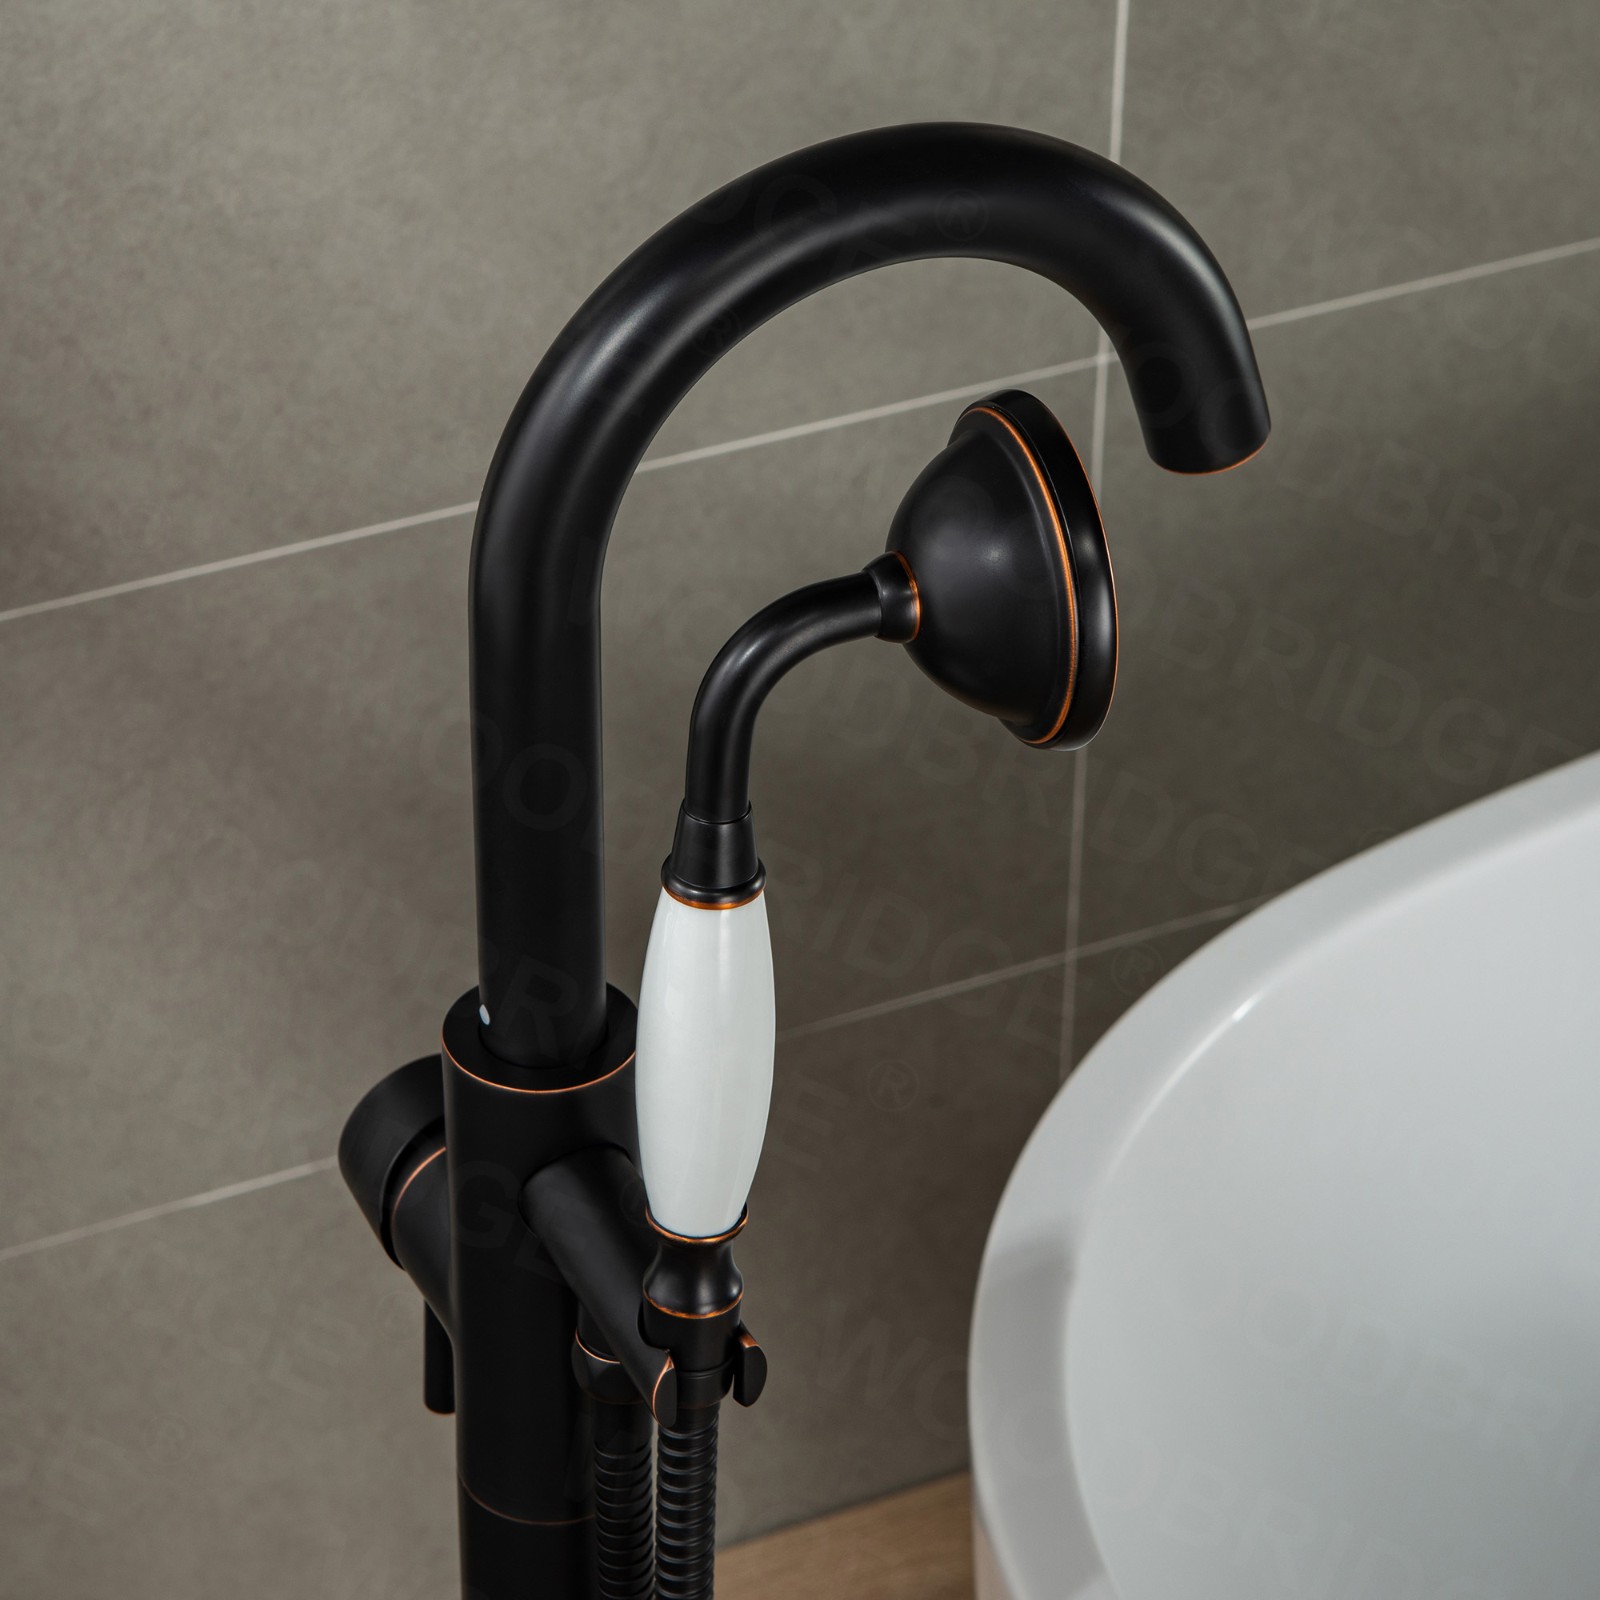  WOODBRIDGE Contemporary Single Handle Floor Mount Freestanding Tub Filler Faucet with Hand Shower in (Oil Rubbed Bronze) Finish,F0010ORBVT_6048